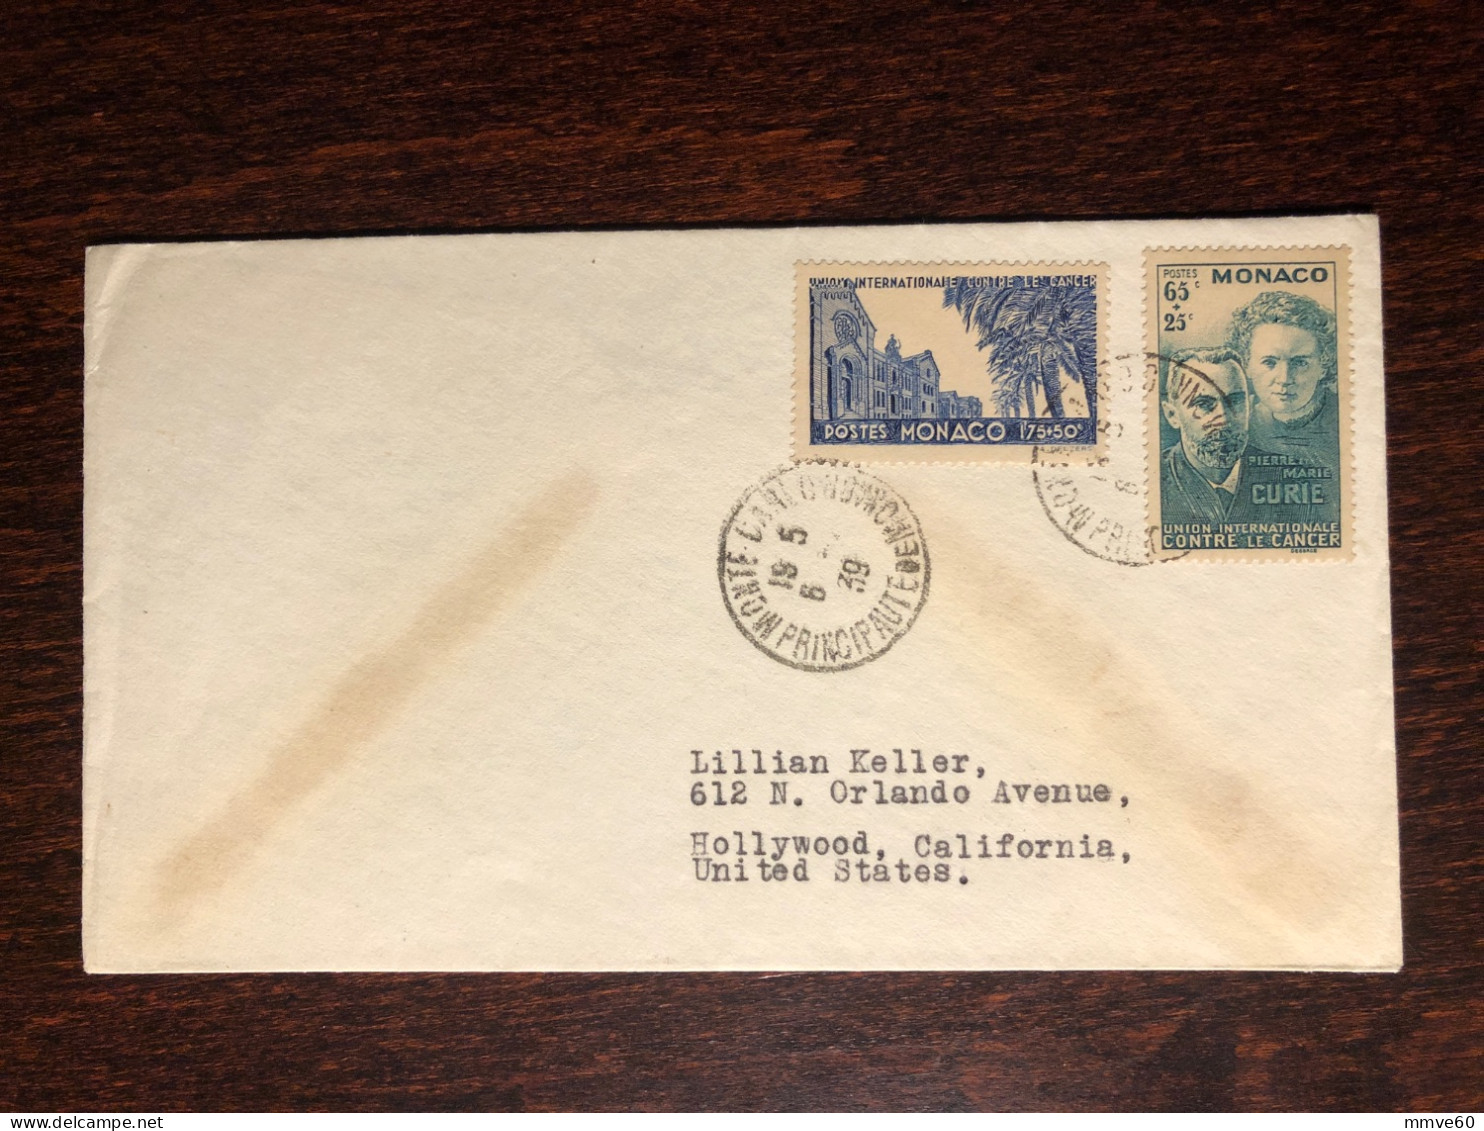 MONACO FDC TRAVELLED COVER LETTER TO USA 1939 YEAR  CURIE CANCER HEALTH MEDICINE - Storia Postale